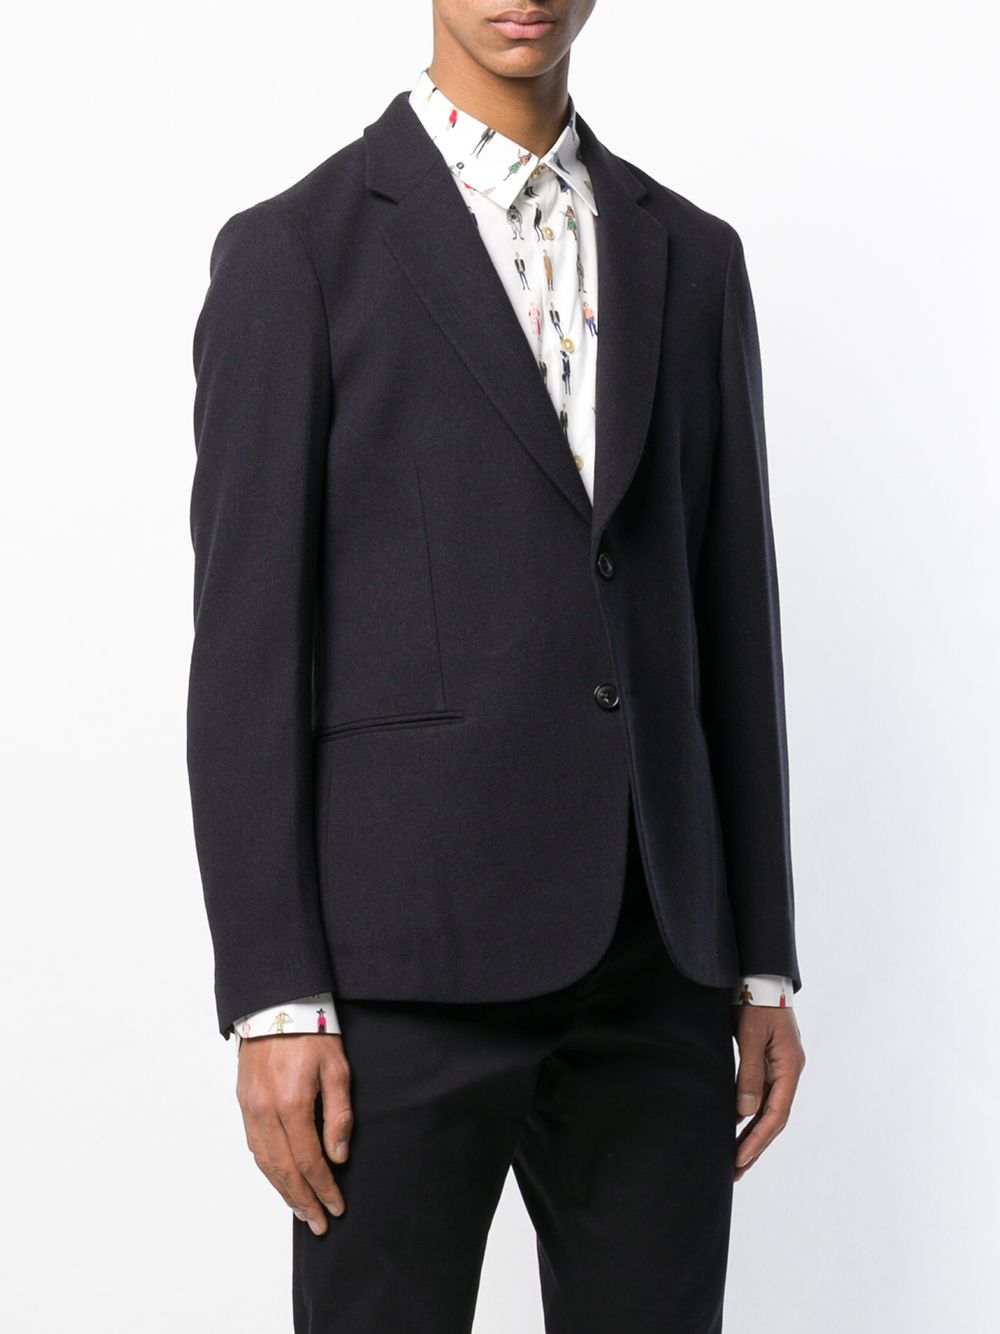 Paul Smith Fitted Suit Jacket - Farfetch